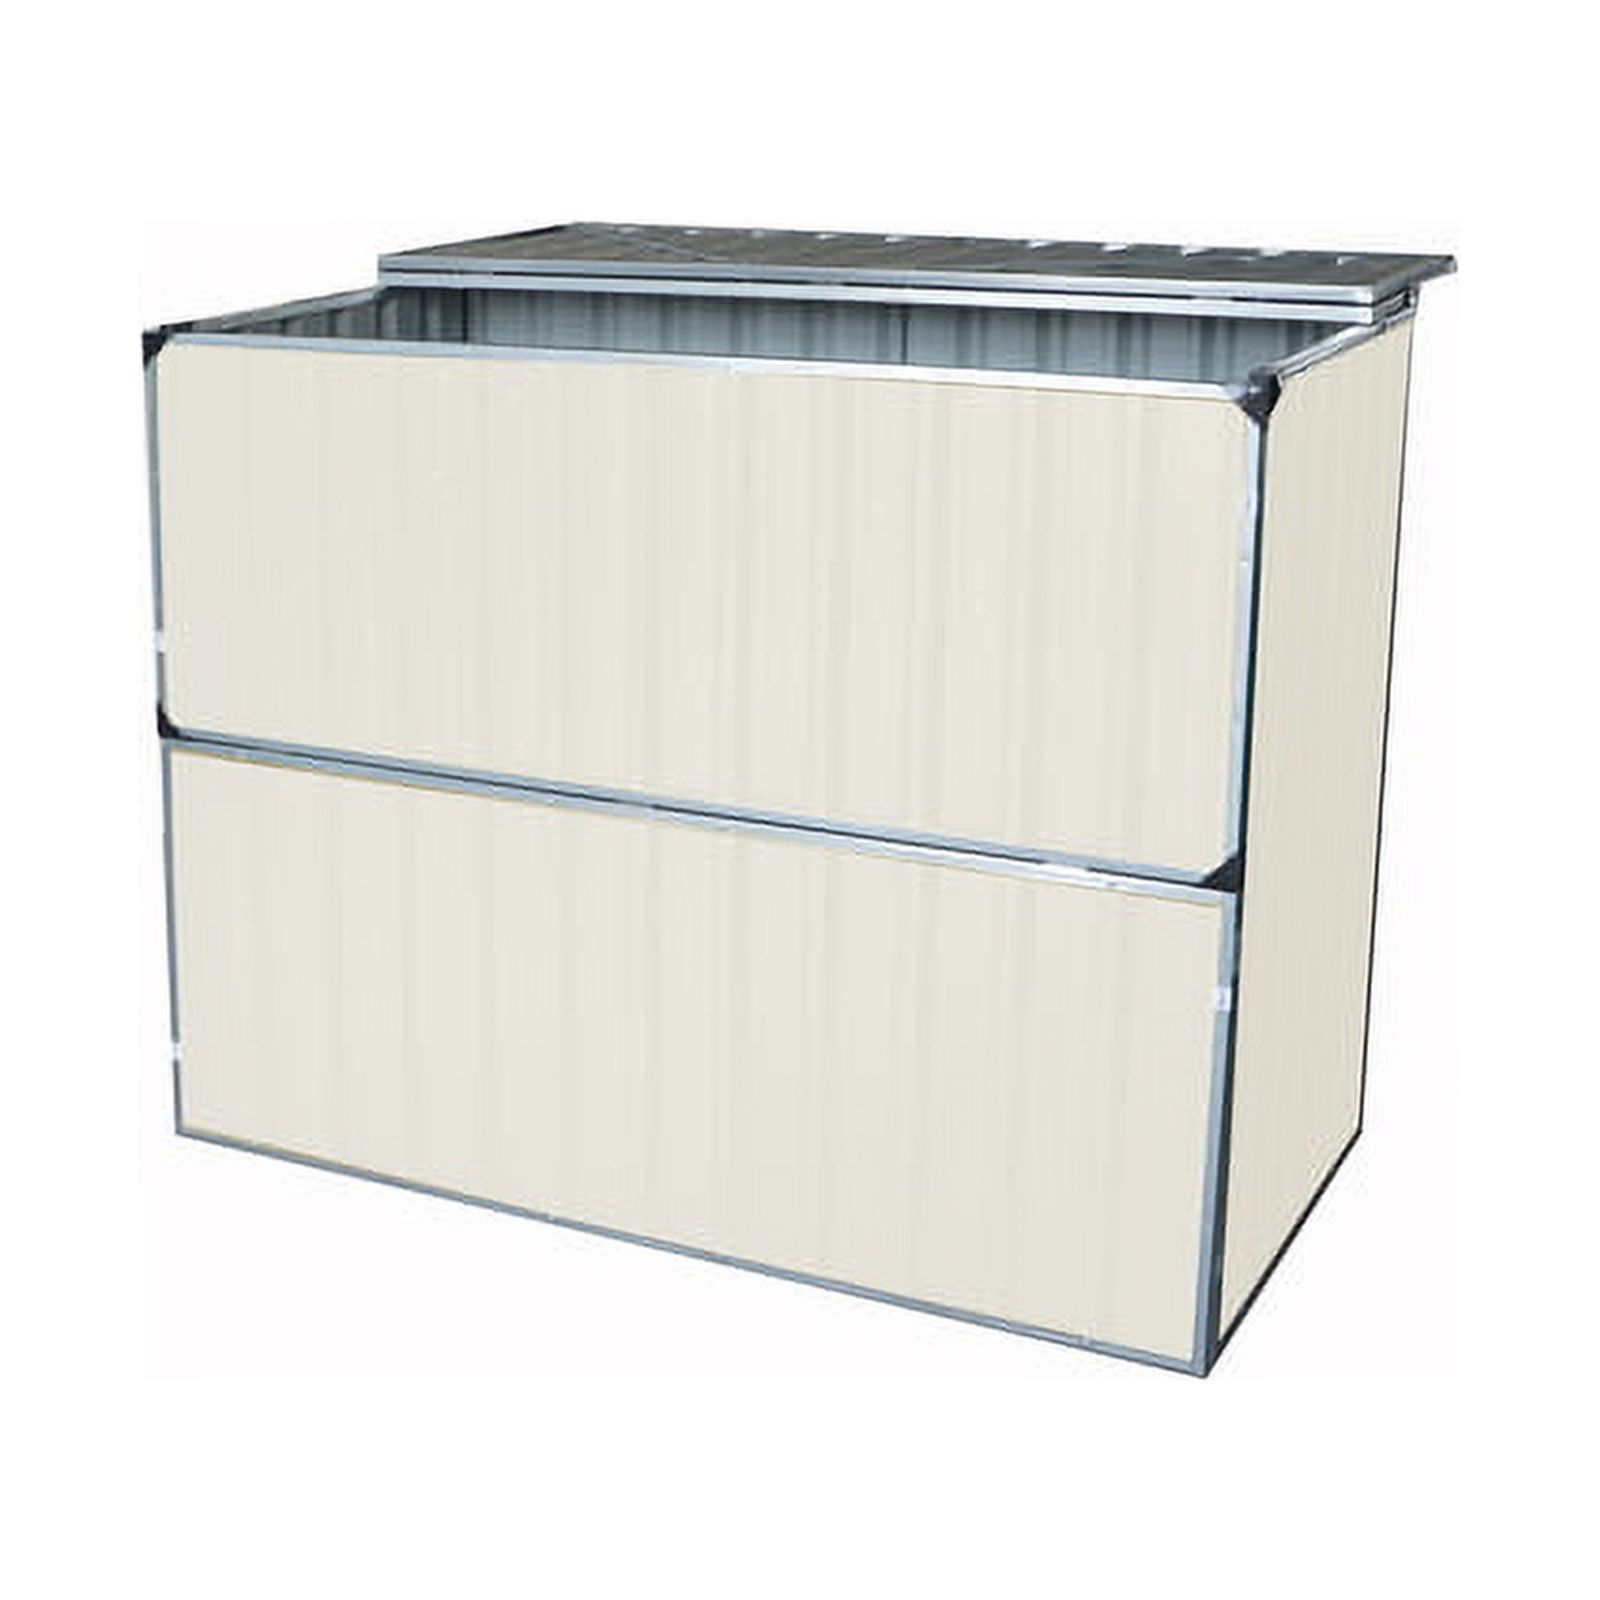 STORGE SHED W/FLOOR 4X3' - image 4 of 6